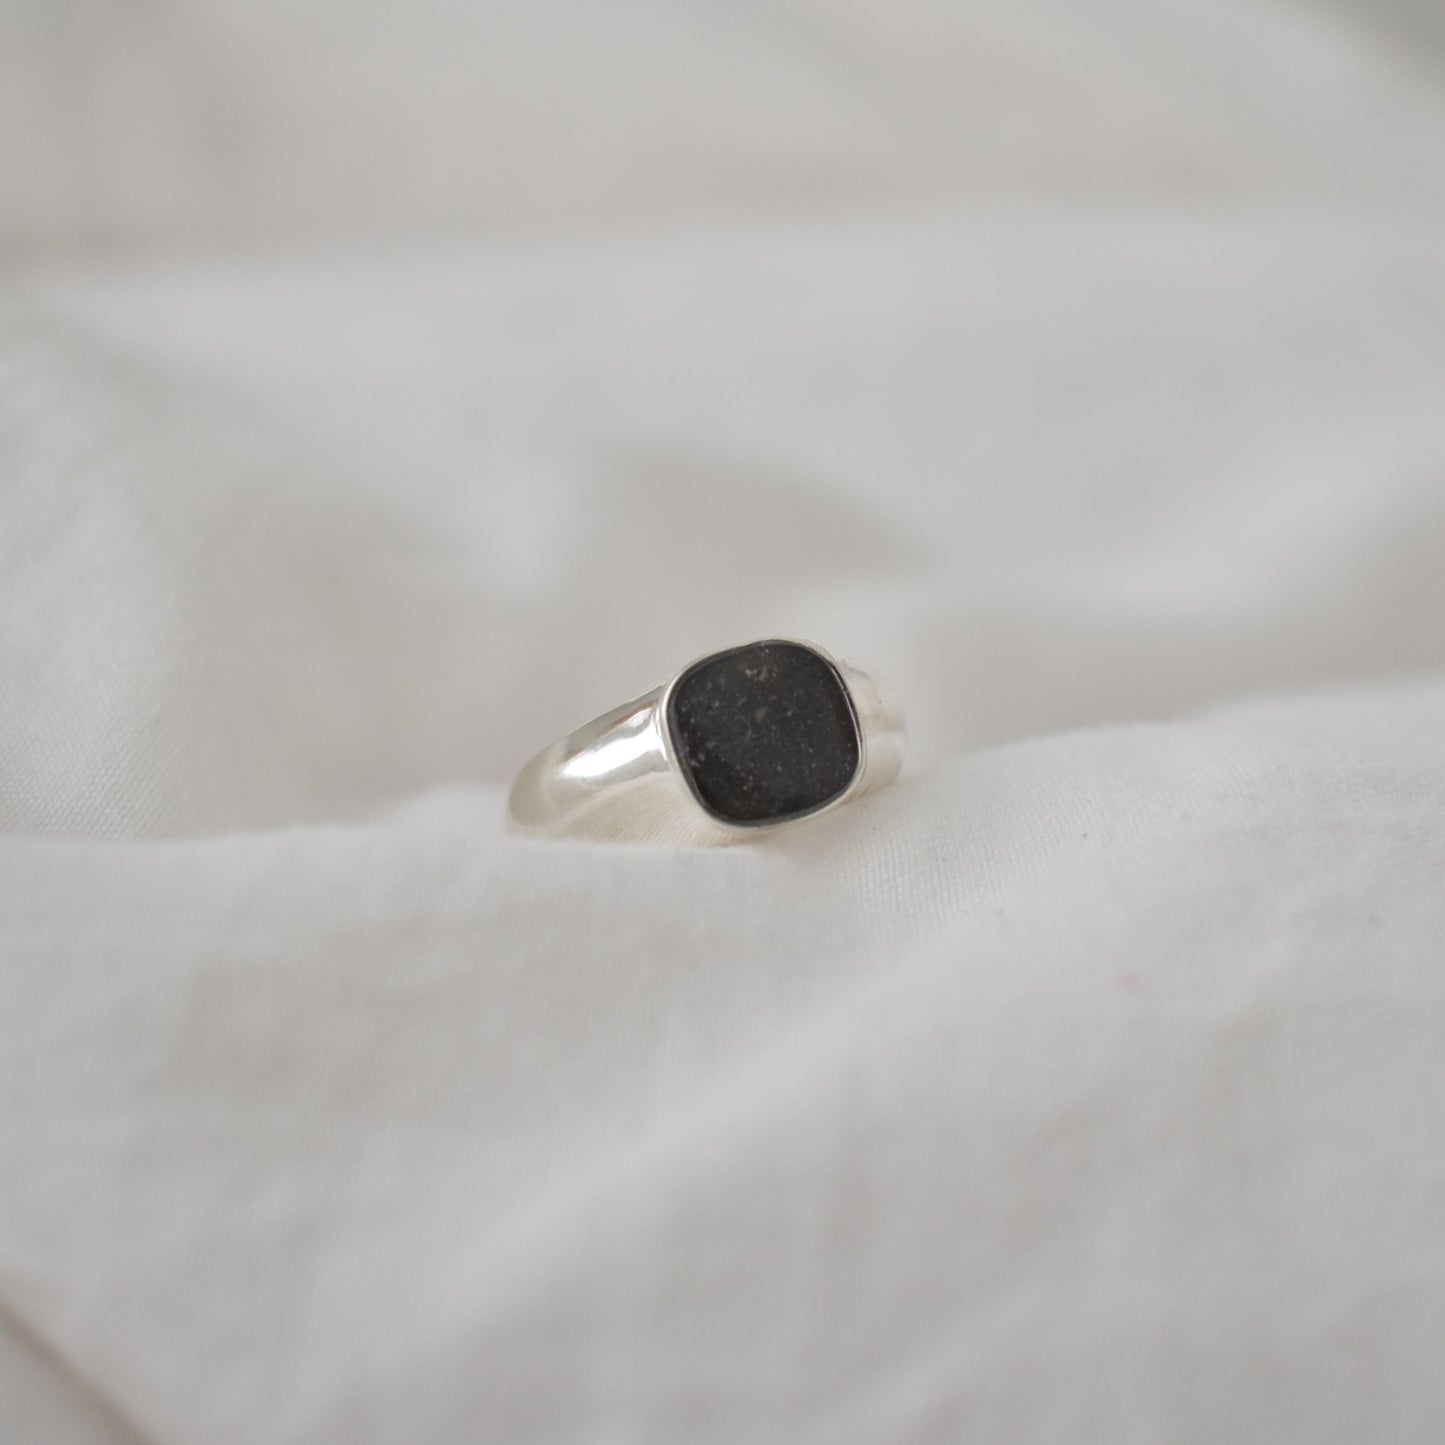 Wide Cushion Ring